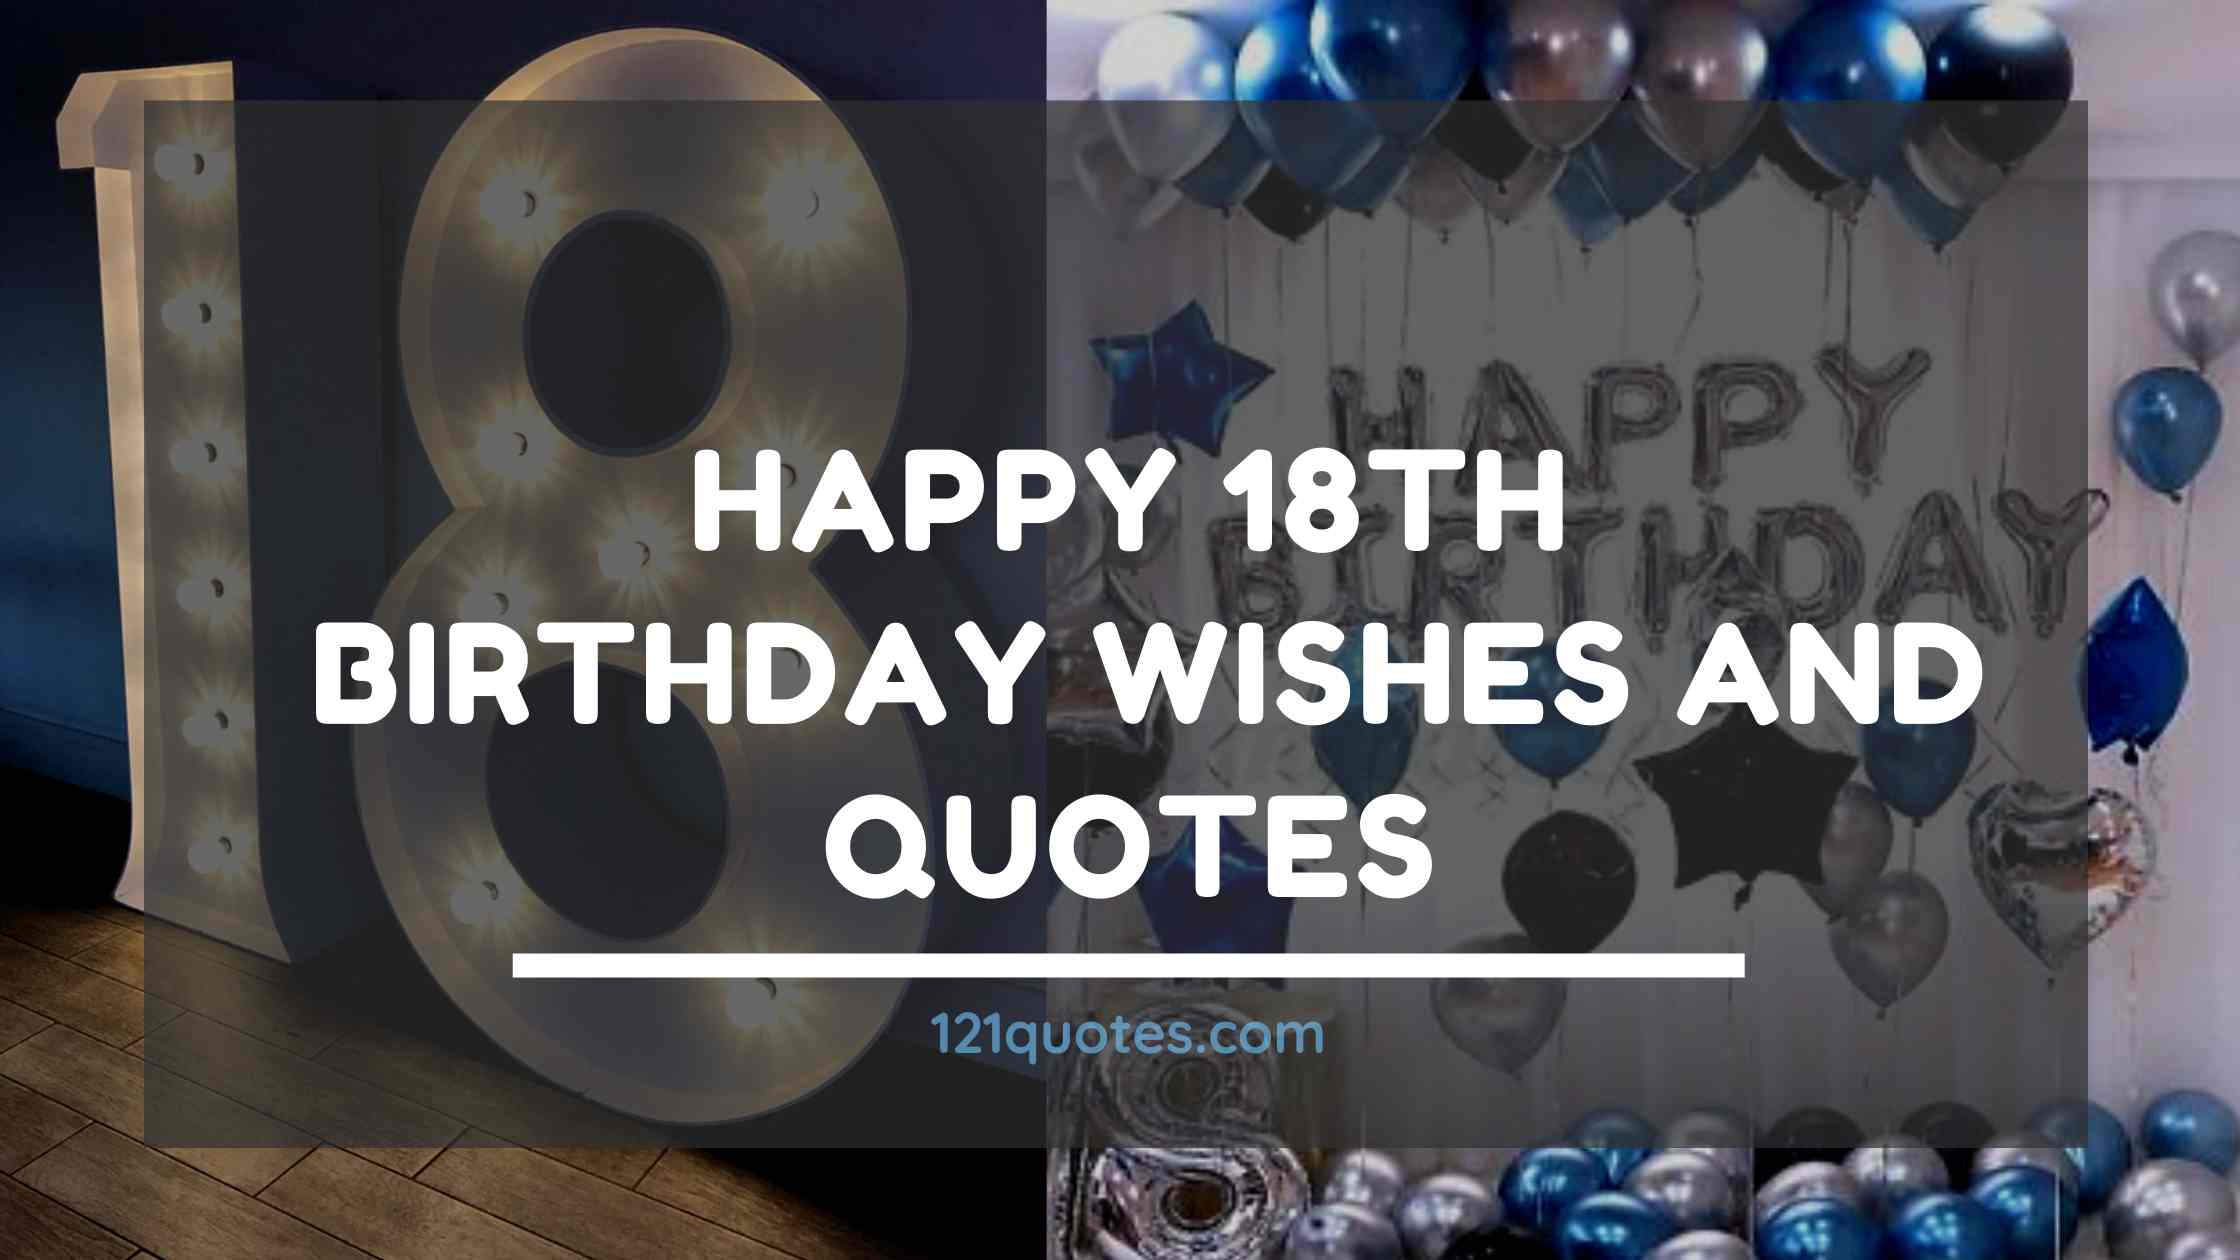 100+ Happy 18th Birthday Wishes and Quotes | 121 Quotes